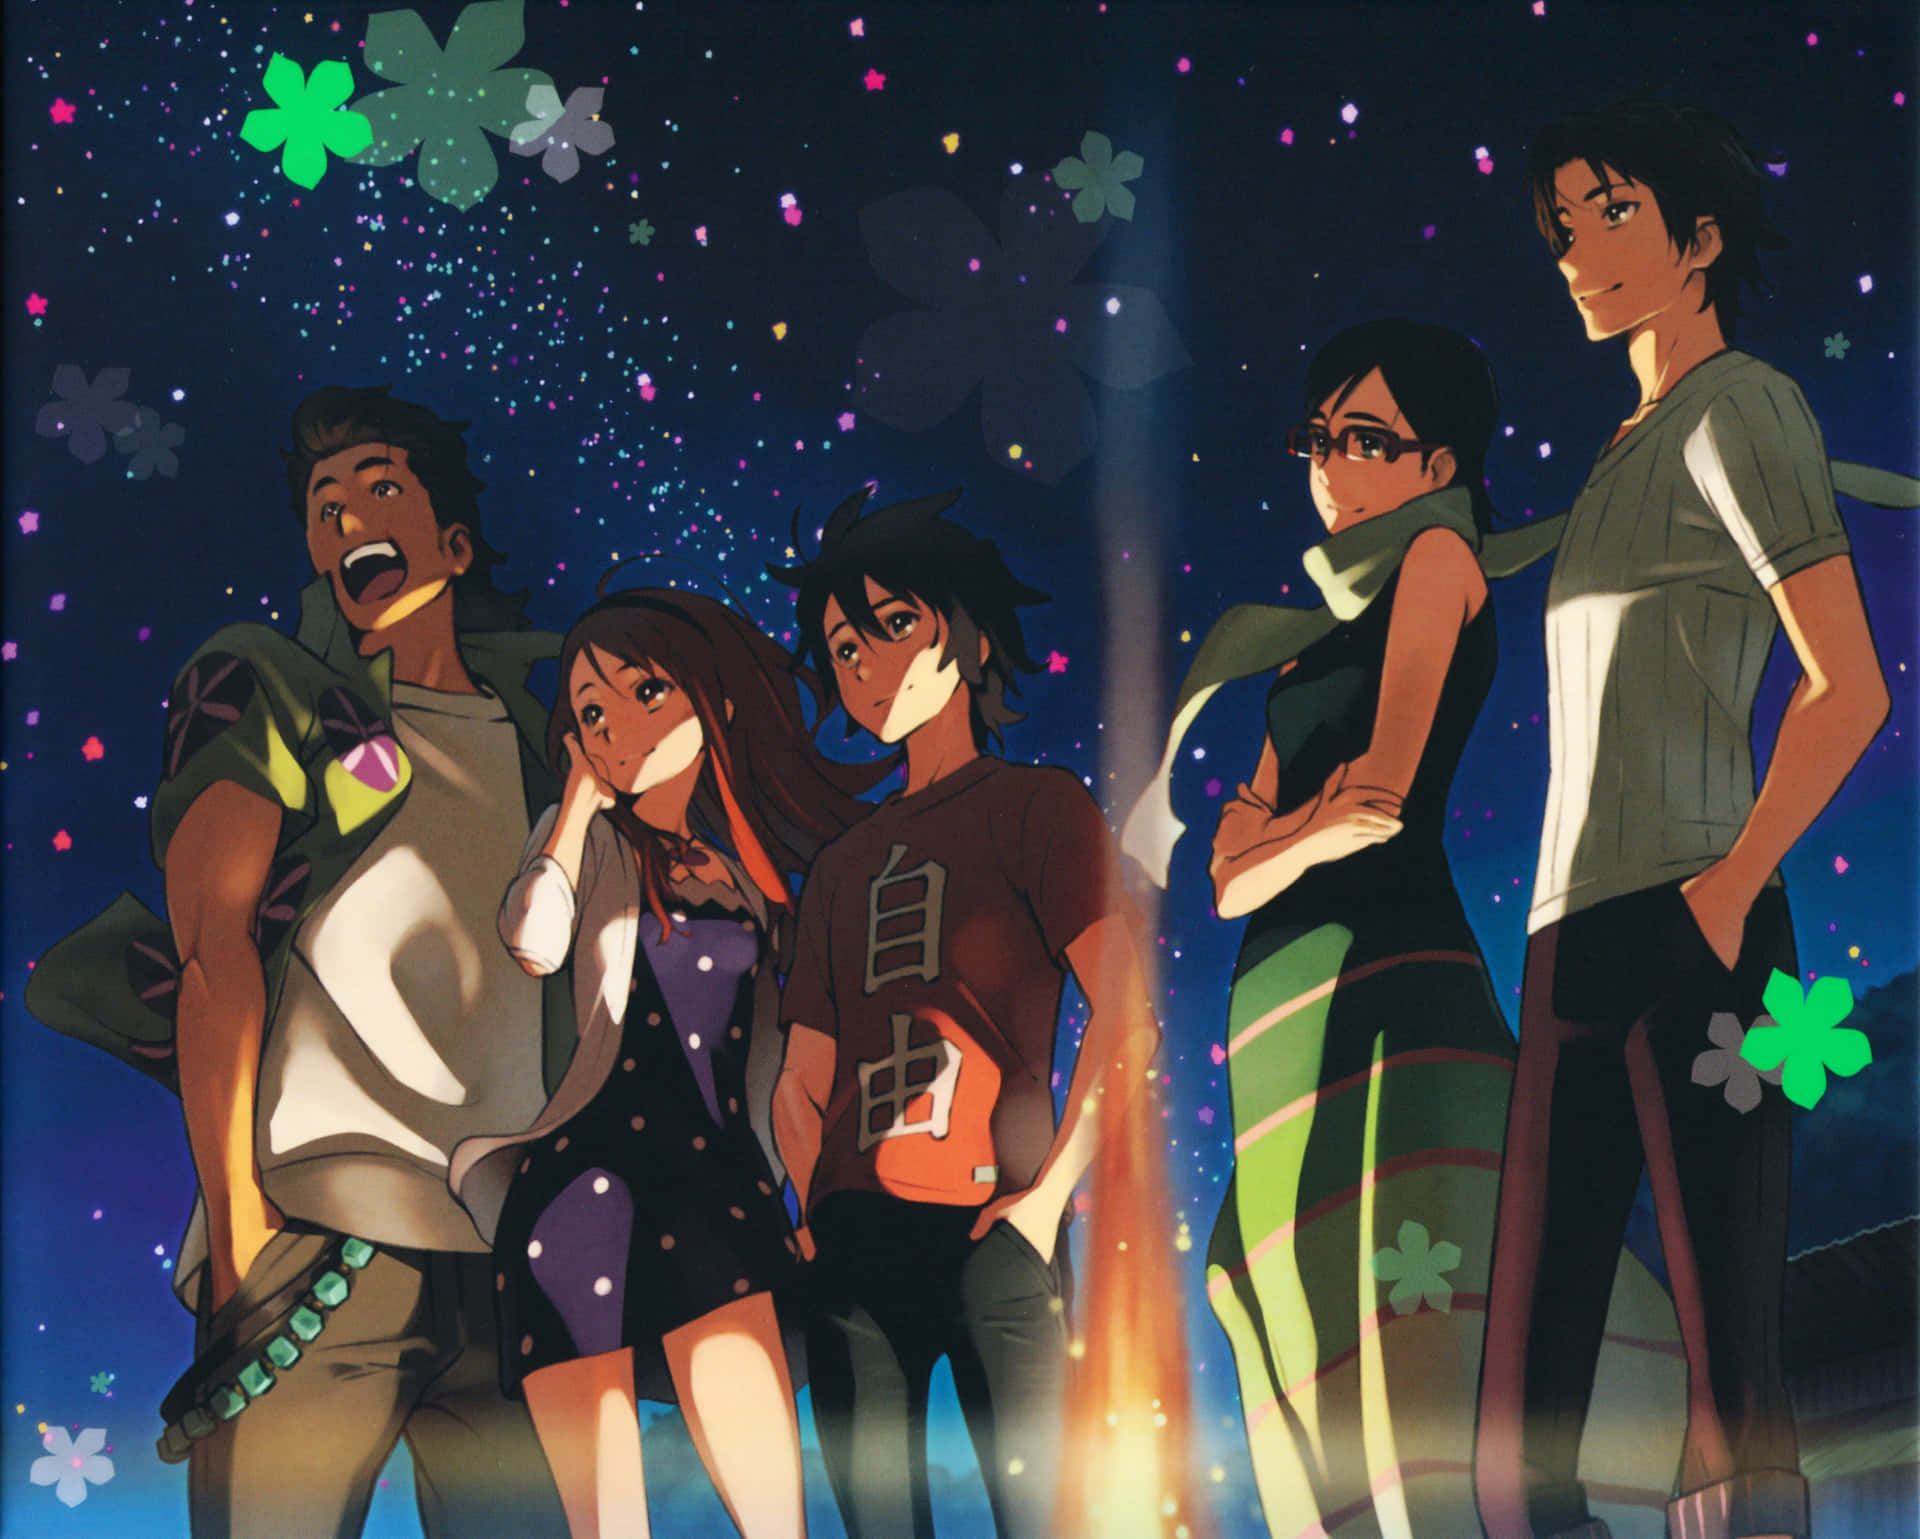 Anohana: the Super Peace Busters, an inspiring story about the power of friendship